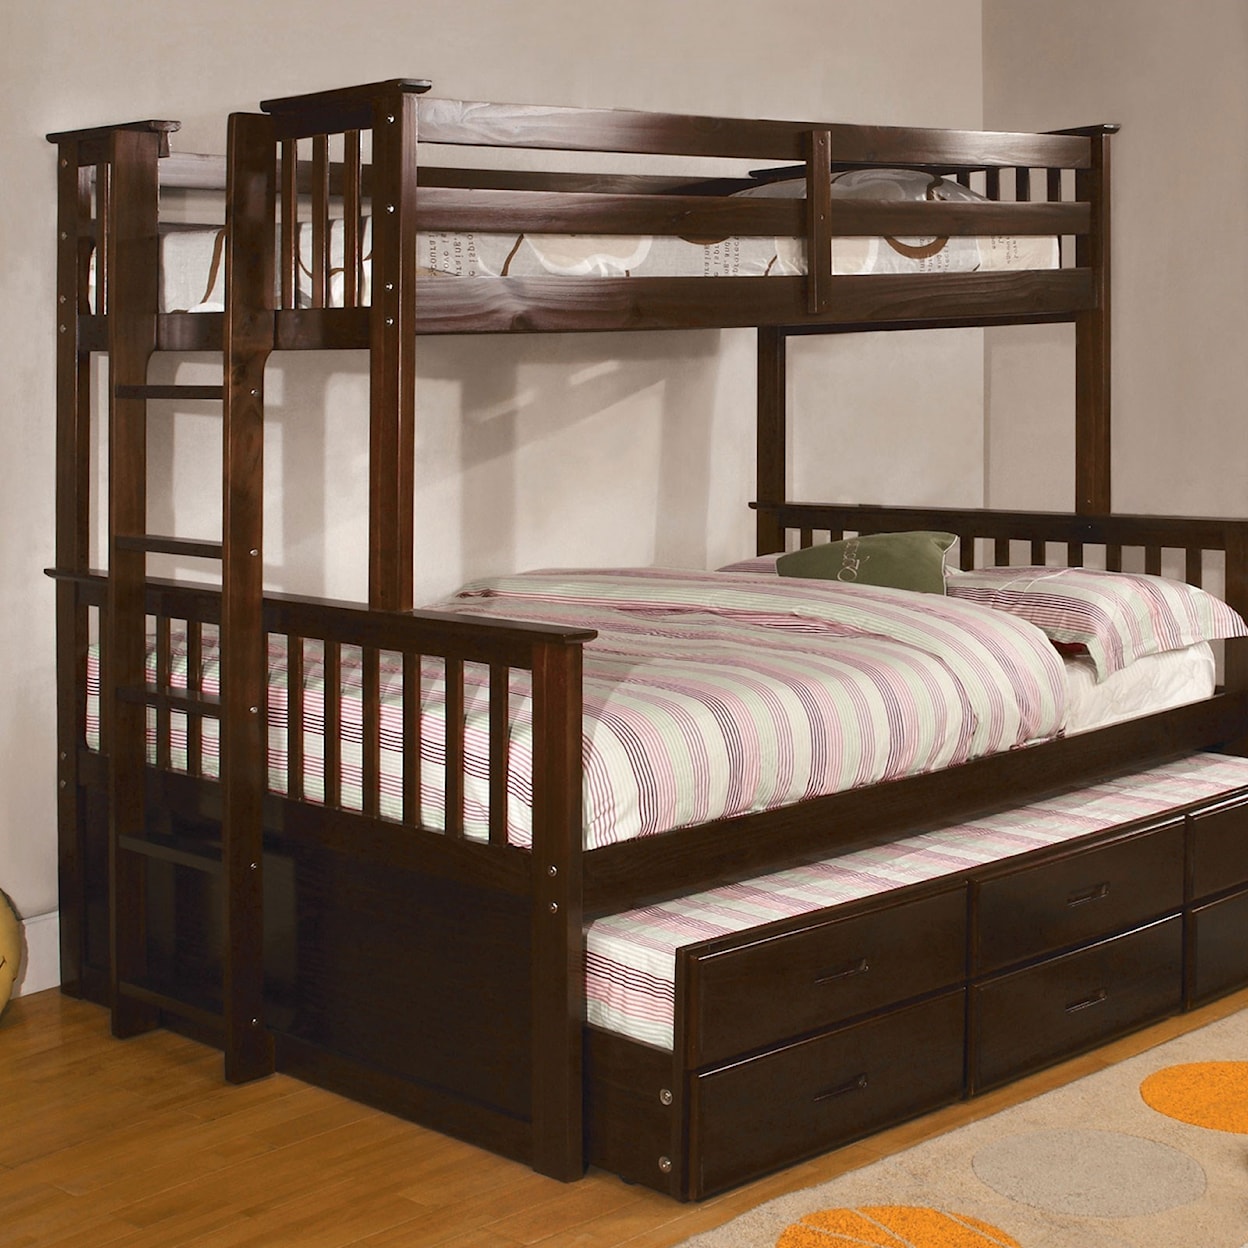 FUSA University Twin-over-Full Bunk Bed and Trundle